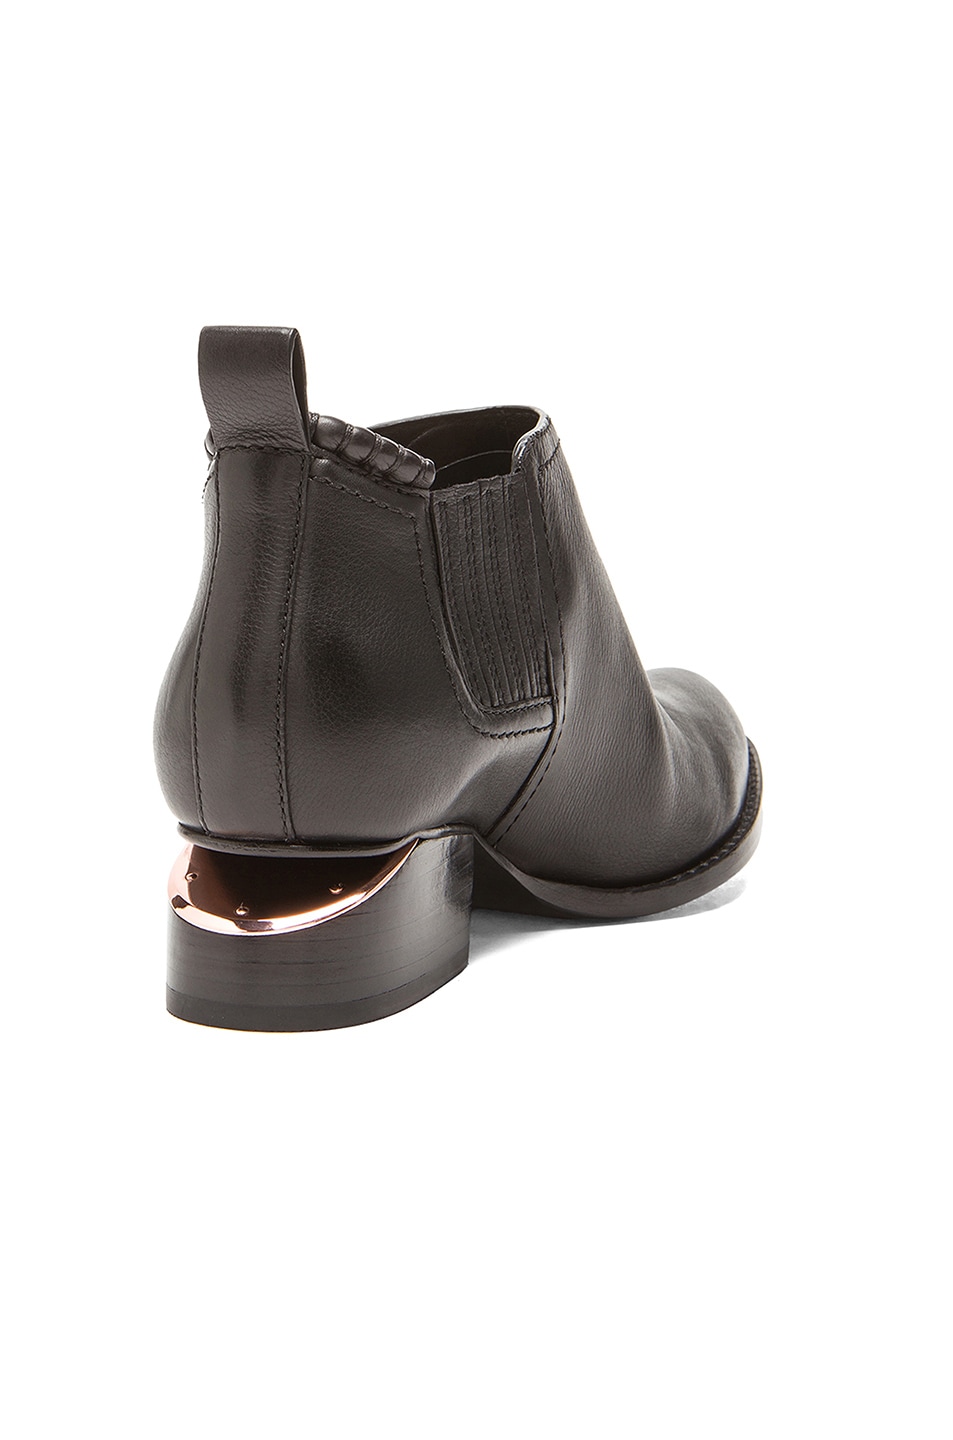 ALEXANDER WANG Kori Leather Ankle Boots with Rose Gold Hardware